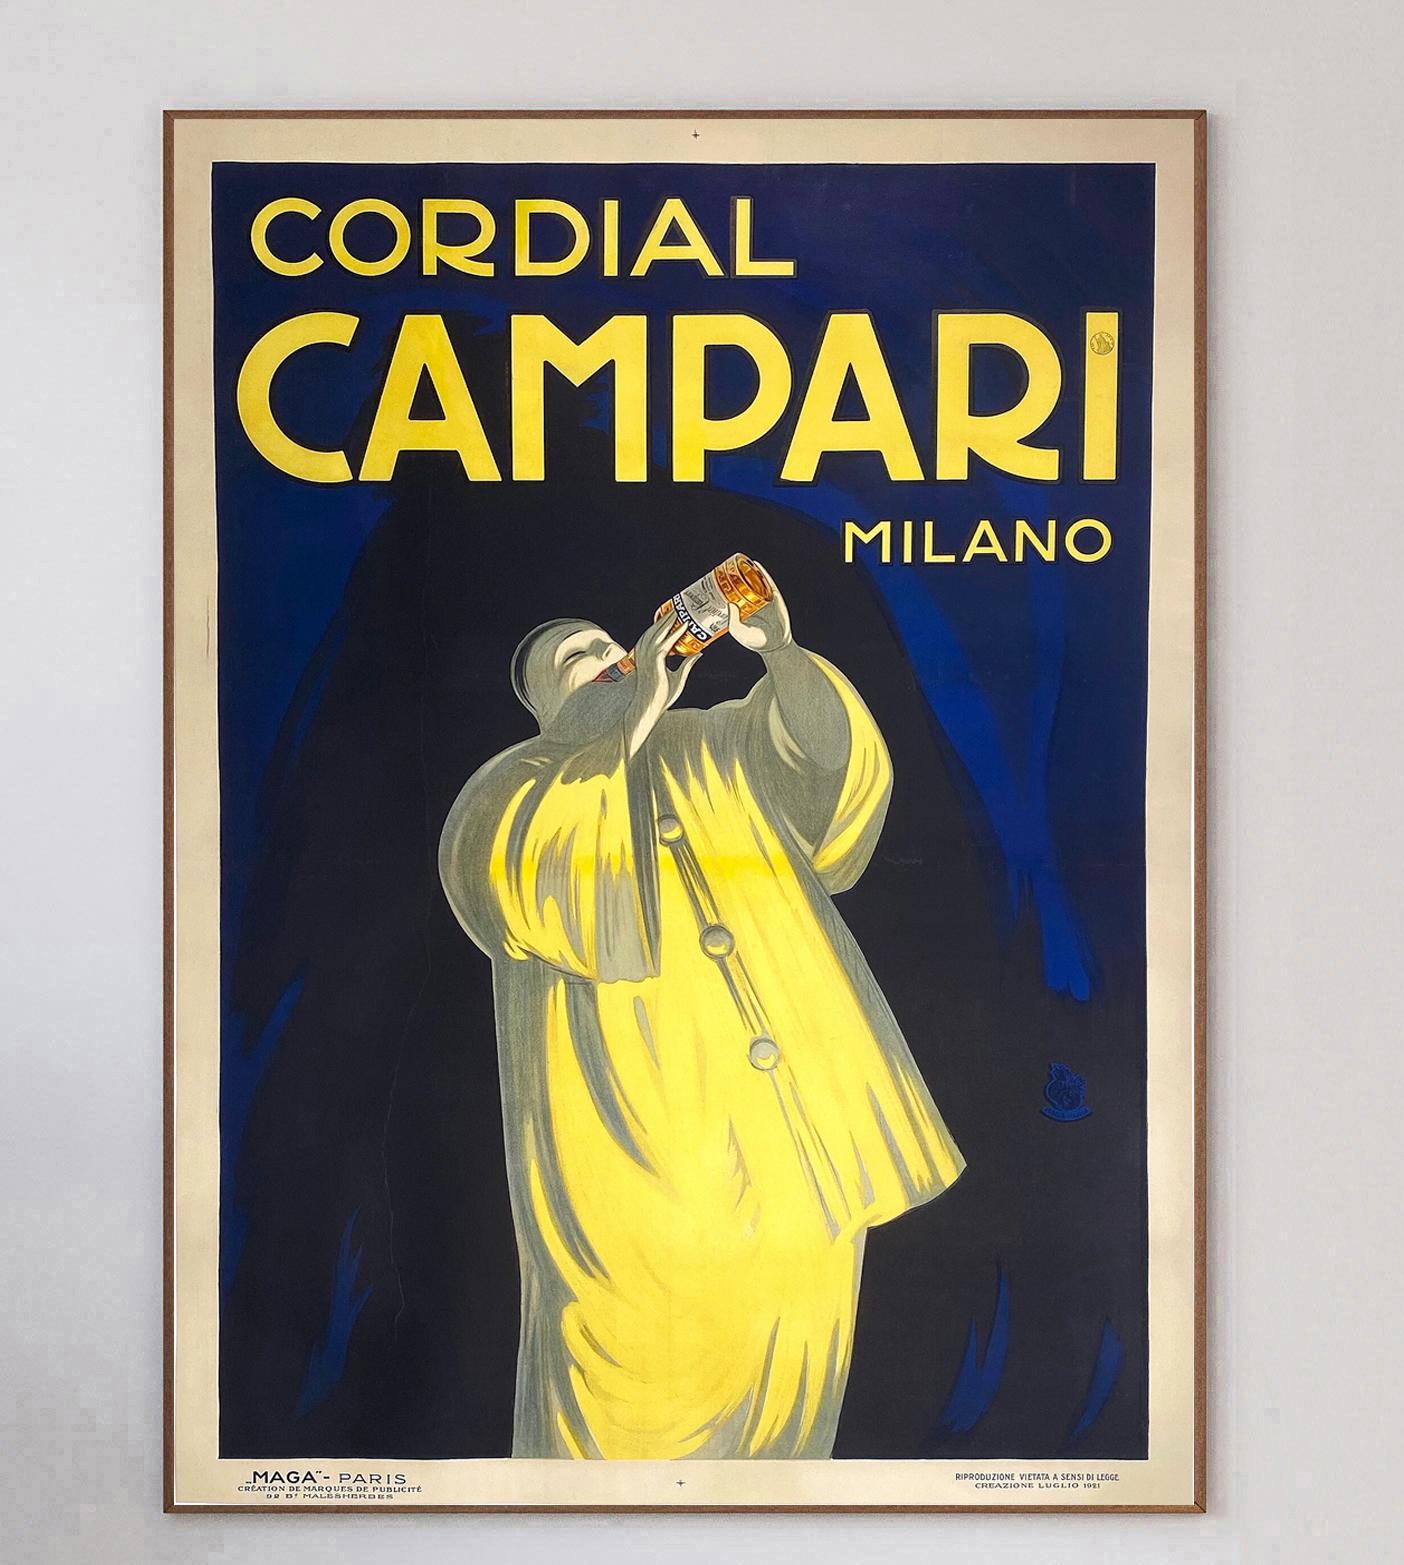 Iconic Italian liqueur brand Campari hired the renowned French-Italian poster designer Leonetto Cappiello to create a number of varied designs across the early part of the 20th century.

Campari was formed in 1860 by Gaspare Campari and the